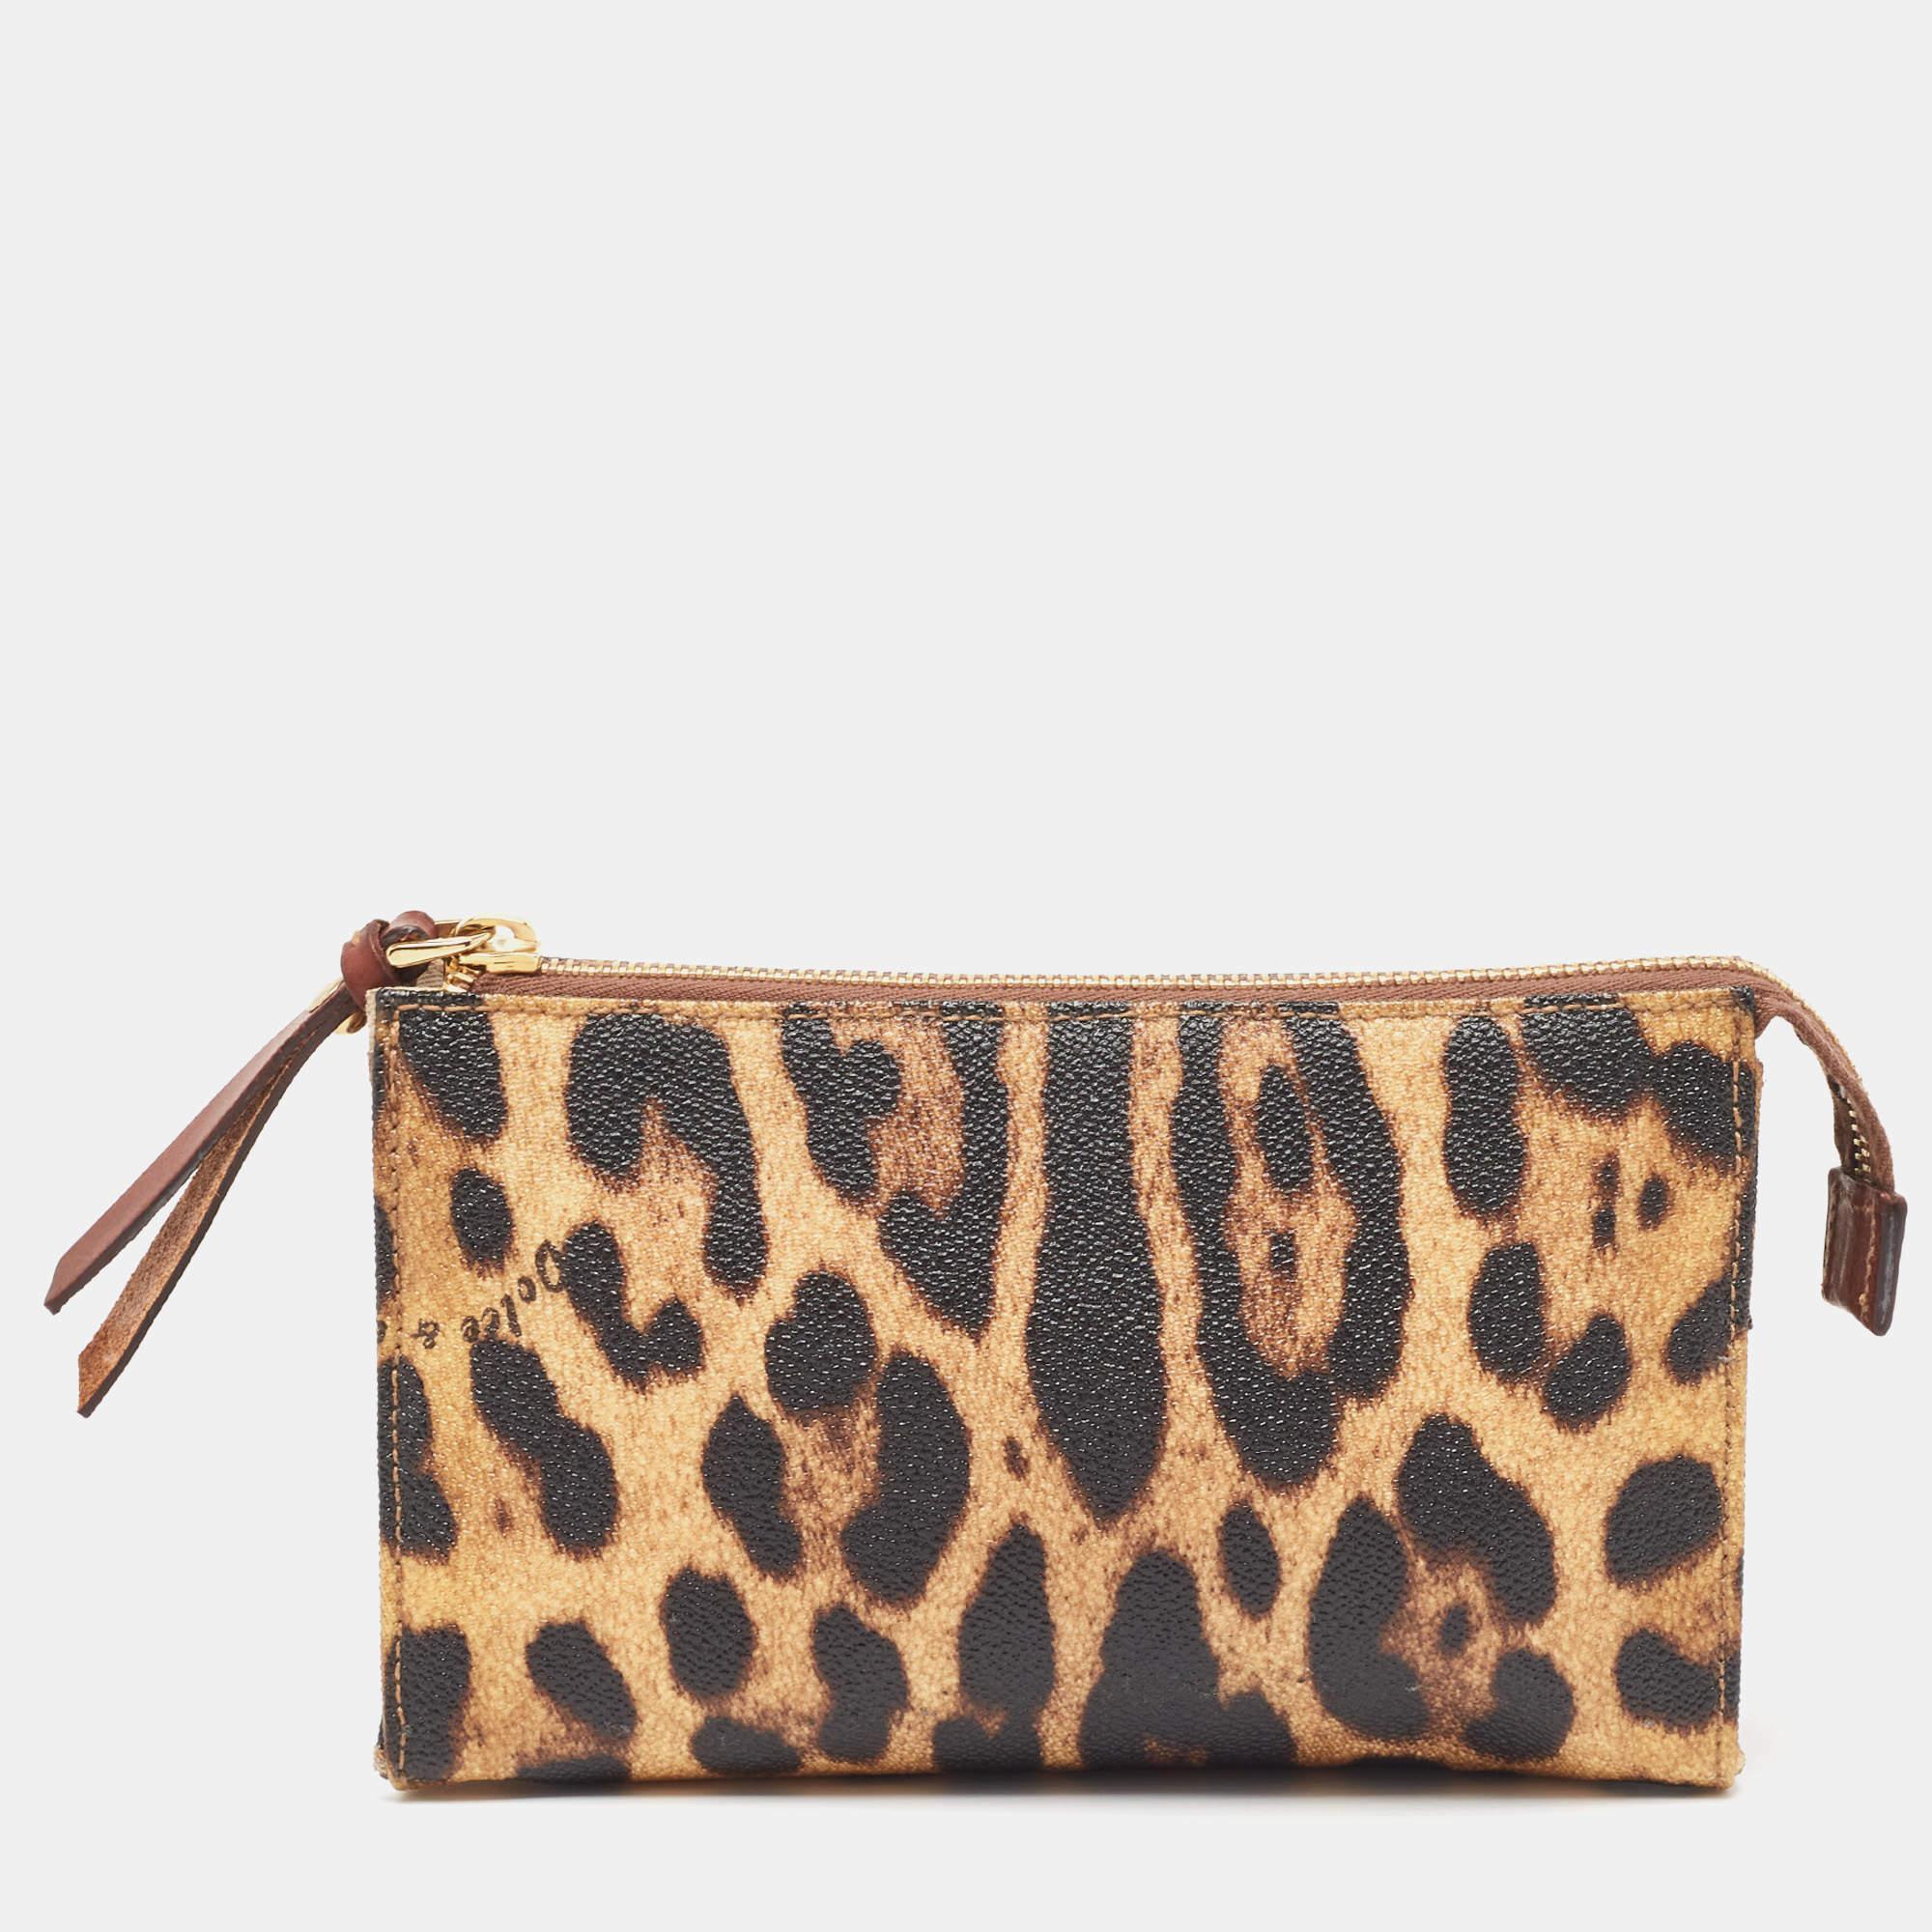 Crafted from leopard print coated canvas & leather, the Dolce & Gabbana vanity case is designed to be a handy, durable accessory. The pouch has a zip-enclosed compartment for your essentials.

Includes: Authenticity Card, Info Card, Brand Tag